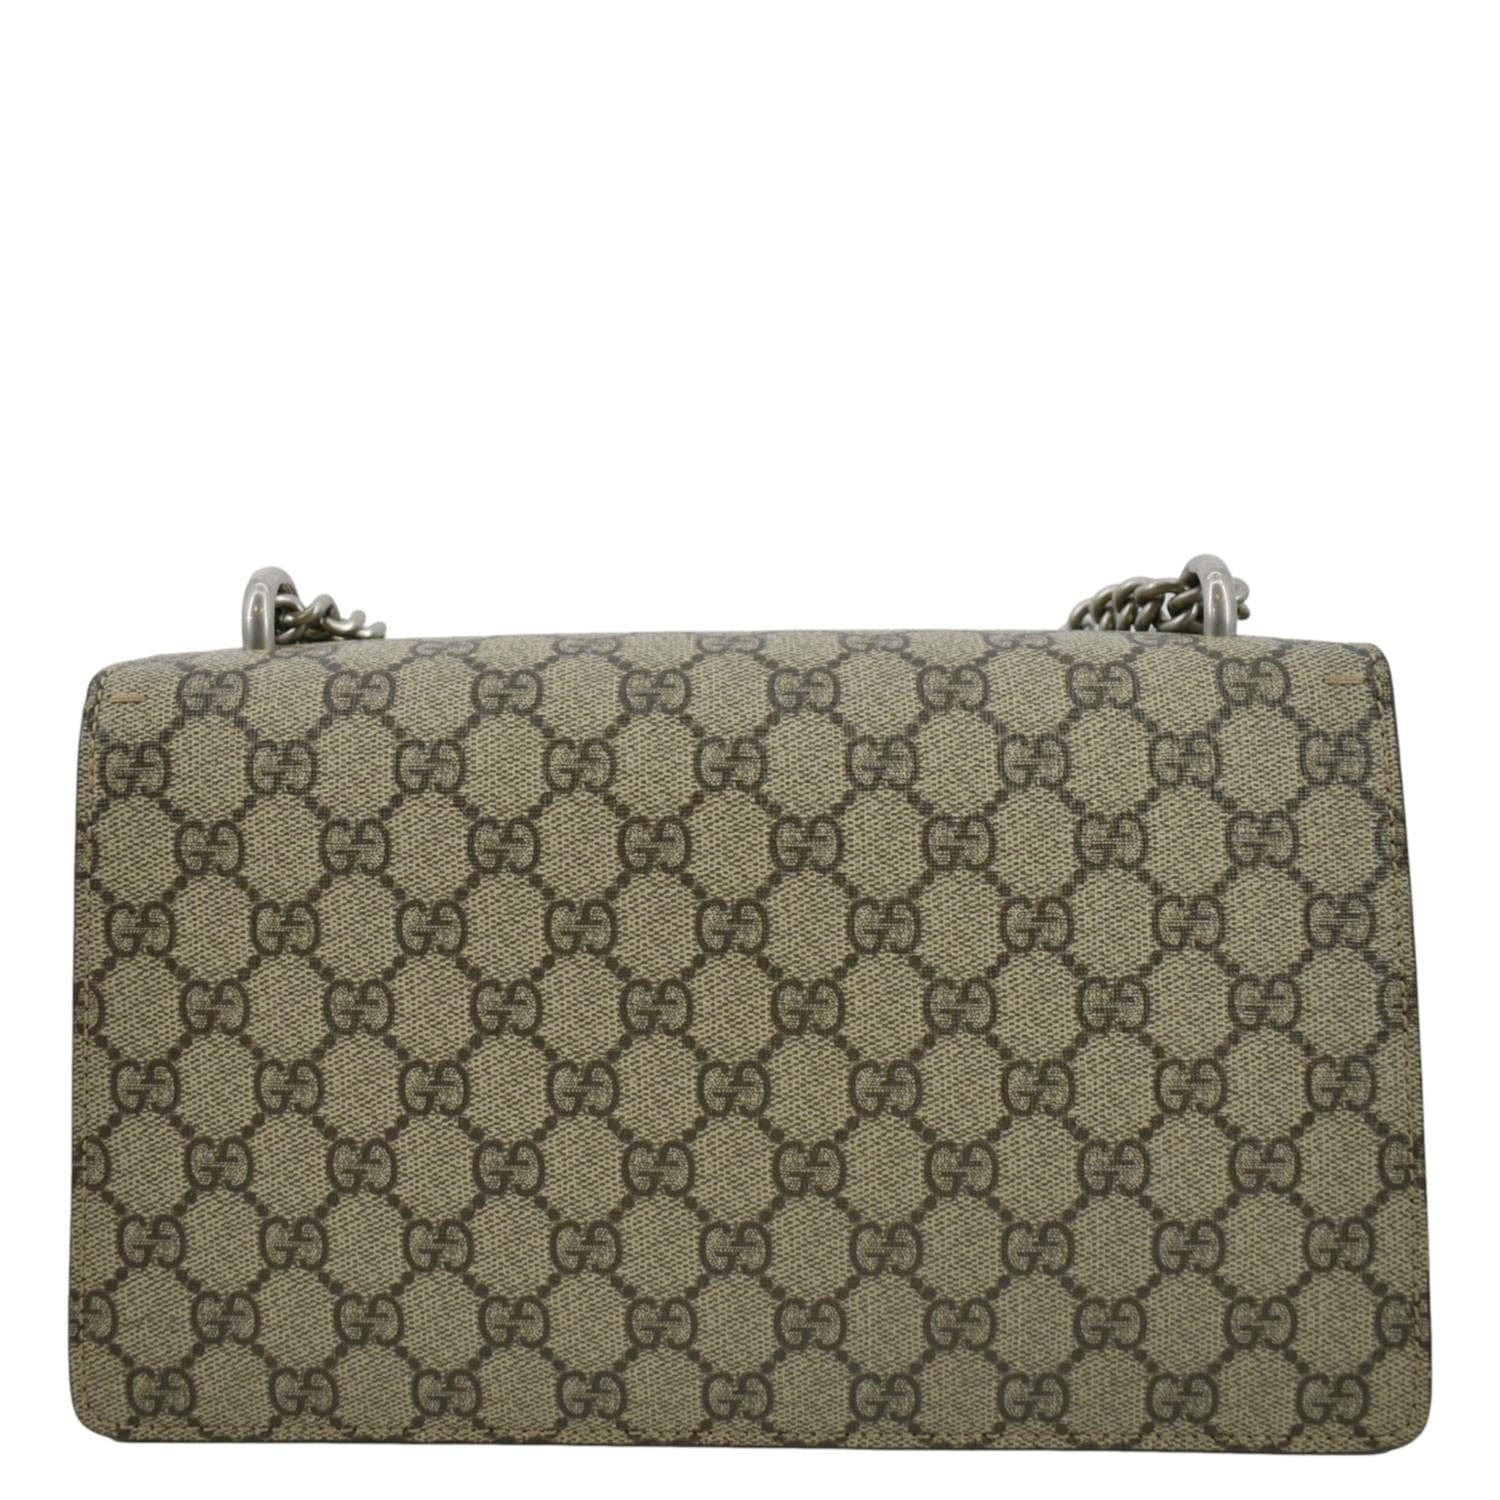 Gucci Dionysus Bags & Handbags for Women, Authenticity Guaranteed